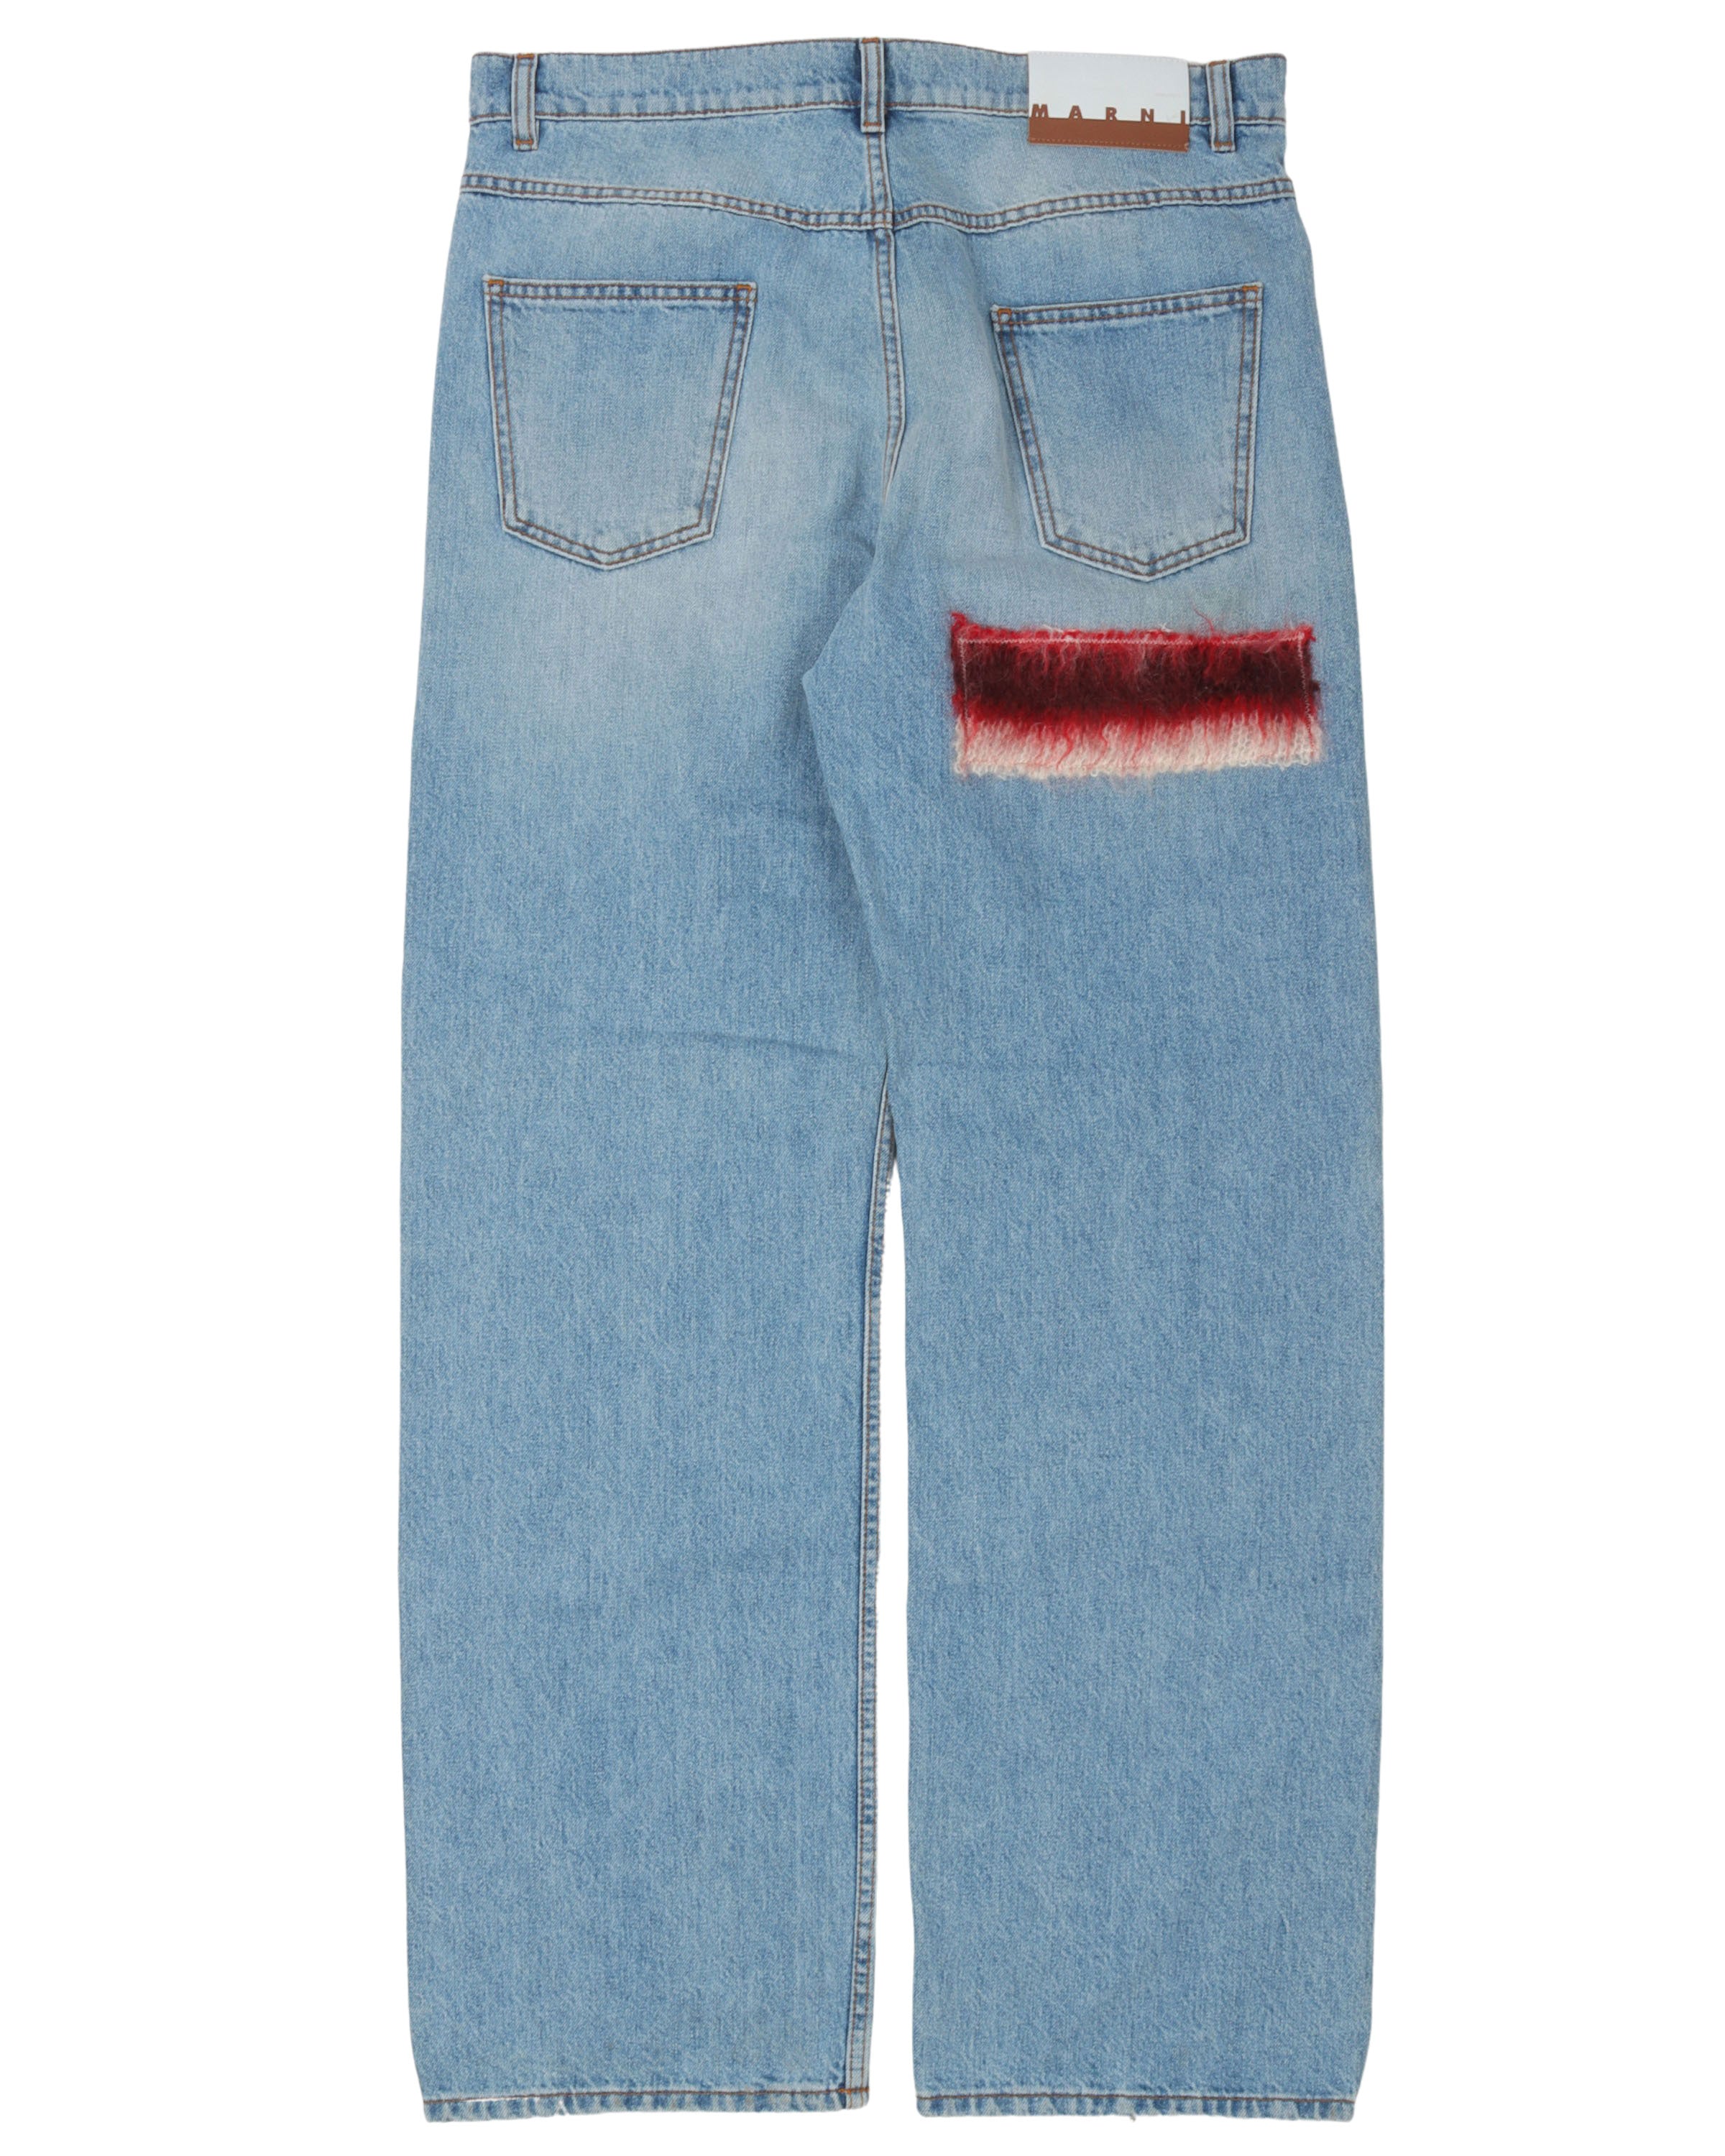 Buy Dark Blue Jeans & Jeggings for Girls by Mode By Red Tape Online |  Ajio.com